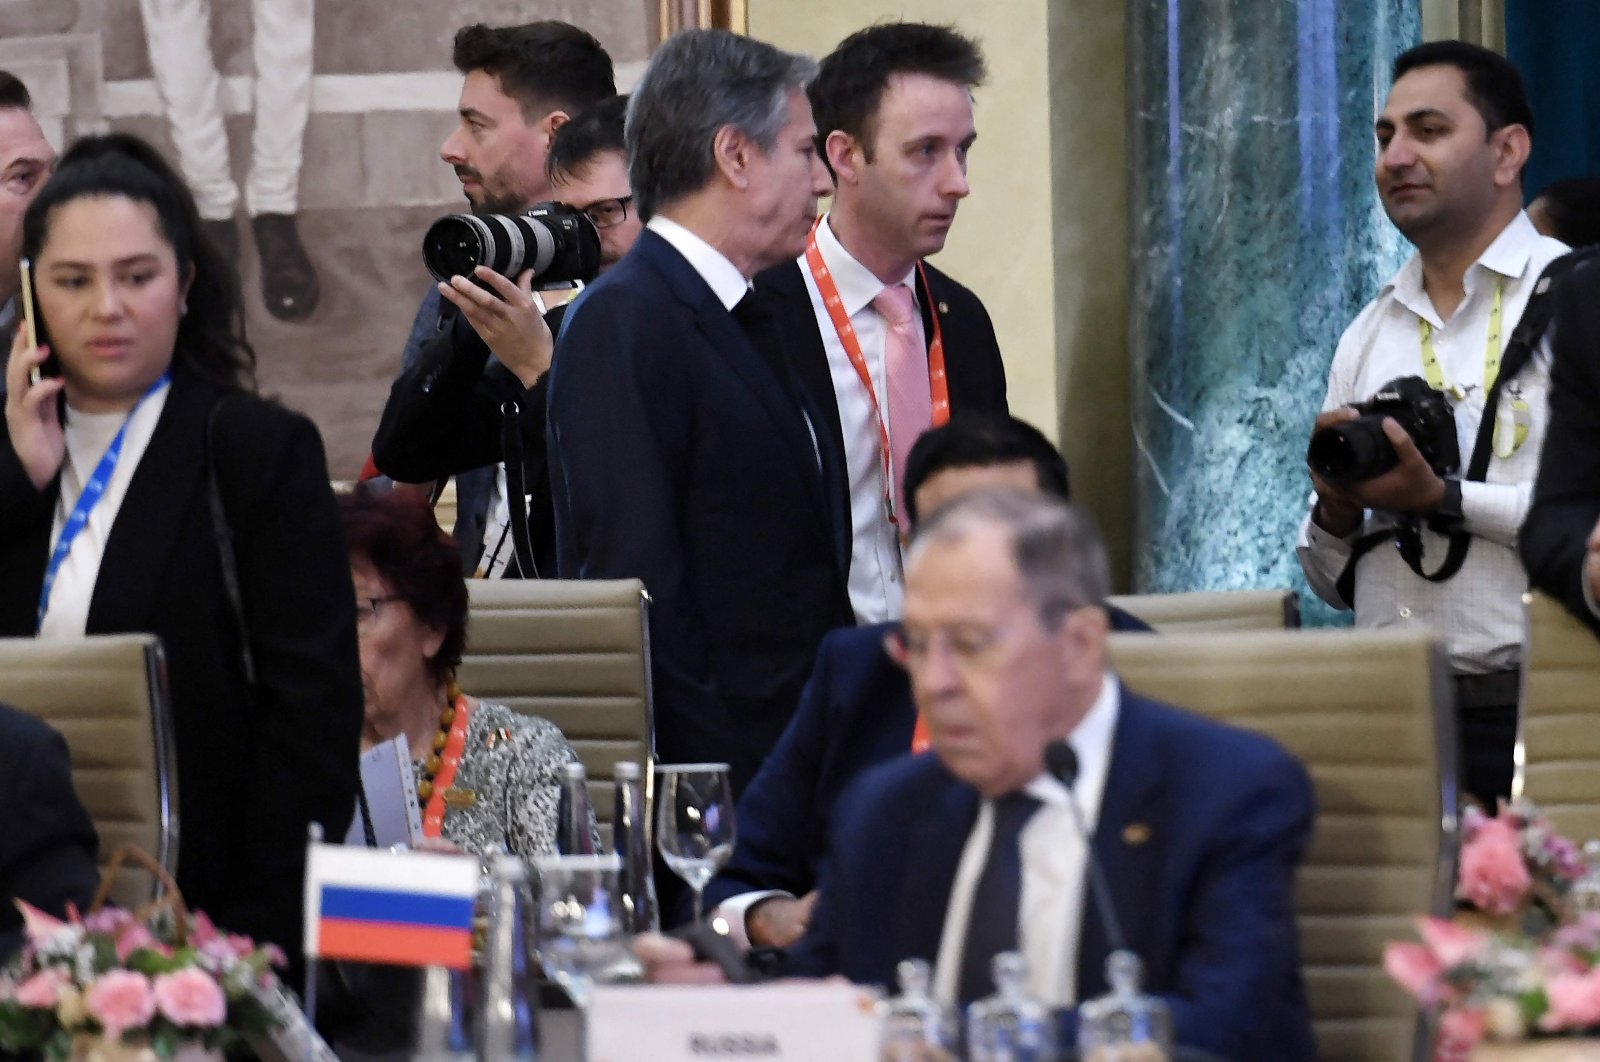 TOPSHOT - US Secretary of State Antony Blinken (top C) walks past Russian Foreign Minister Sergei Lavrov (lower) during the G20 foreign ministers' meeting in New Delhi on March 2, 2023. (Photo by OLIVIER DOULIERY / POOL / AFP)